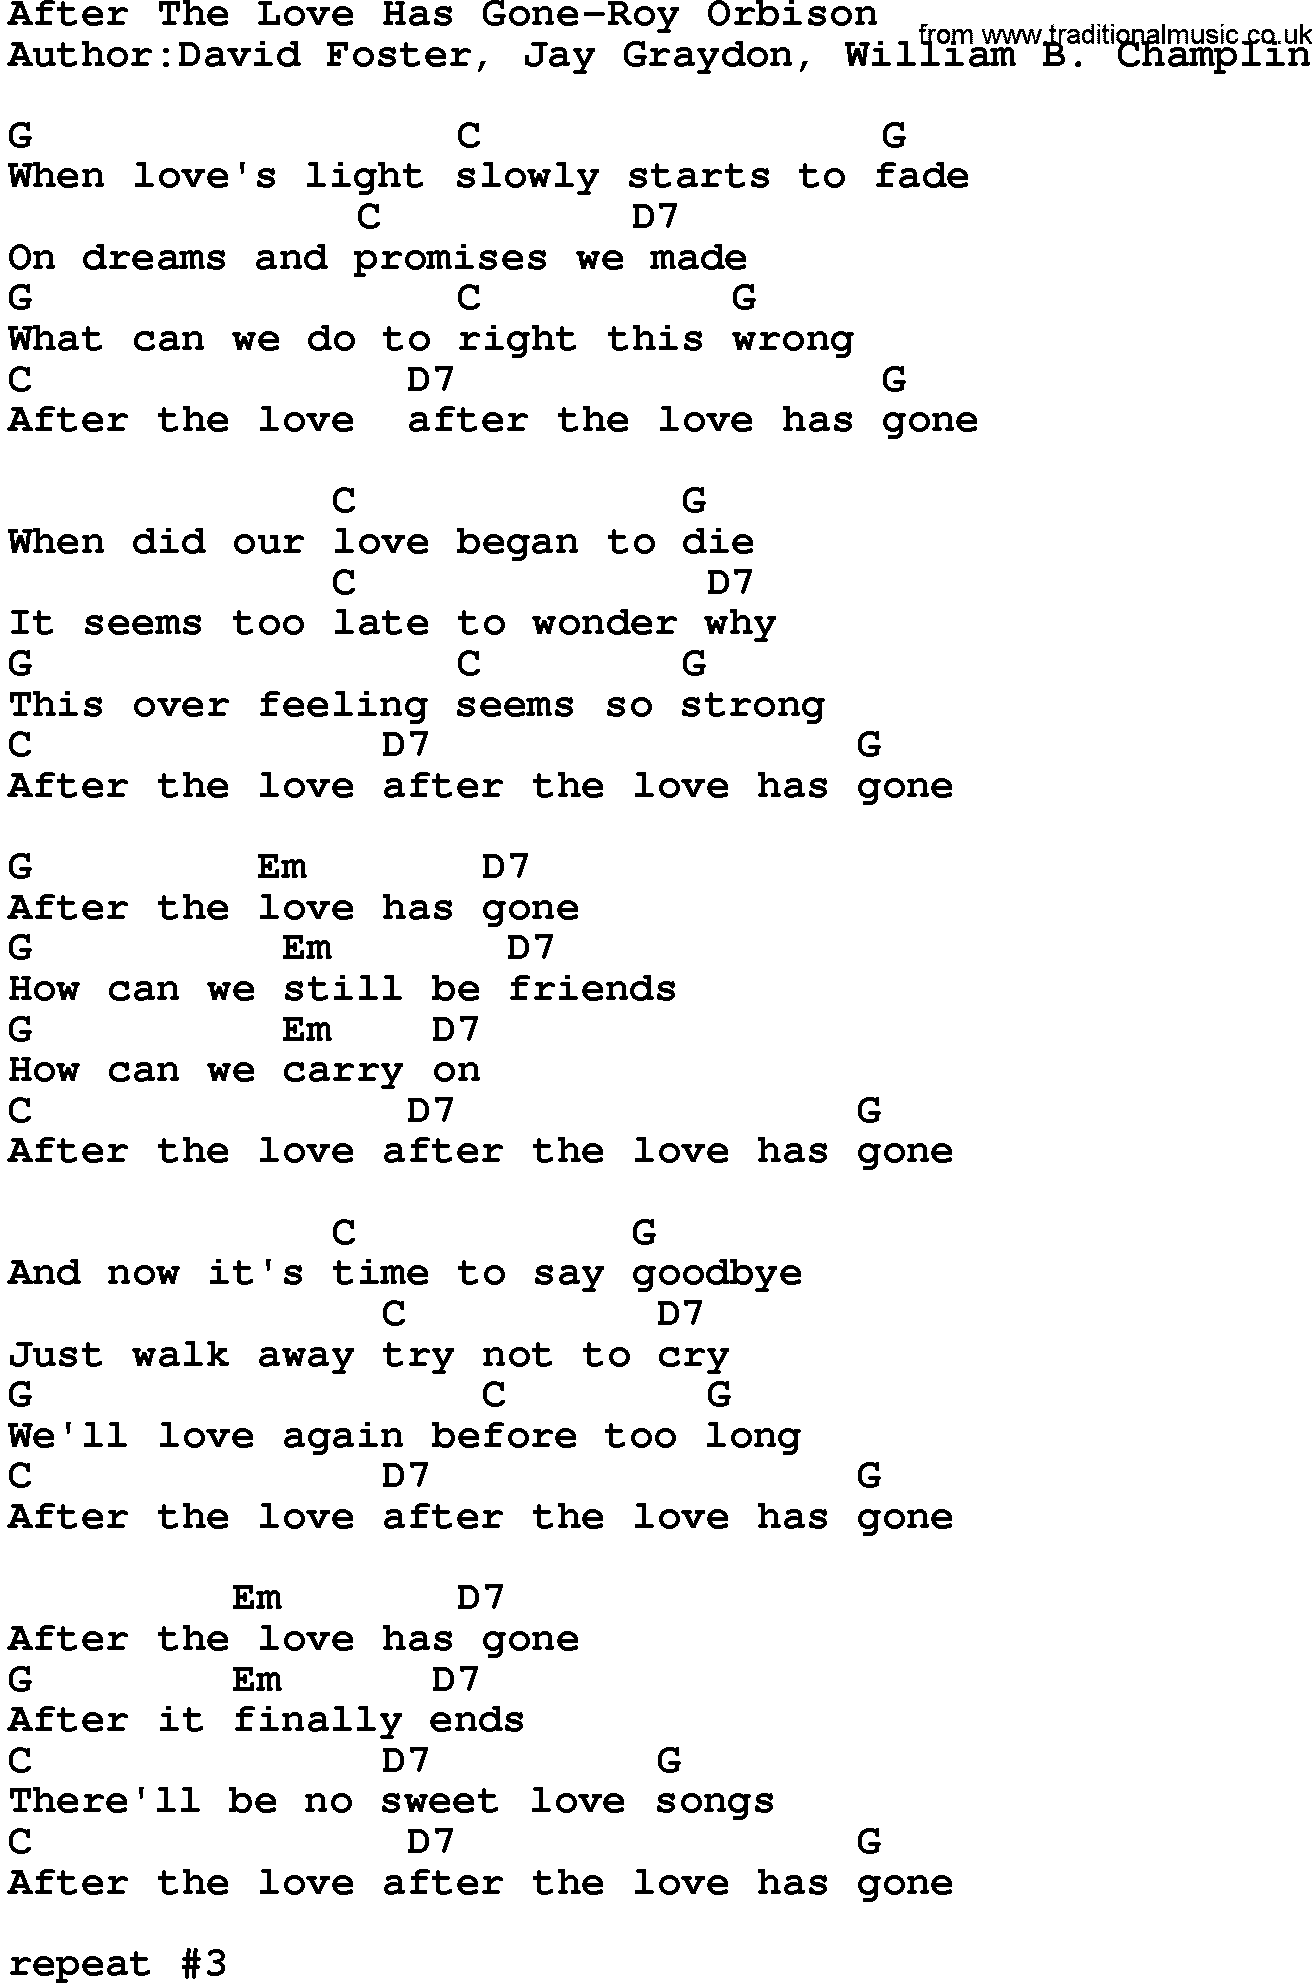 Country music song: After The Love Has Gone-Roy Orbison lyrics and chords